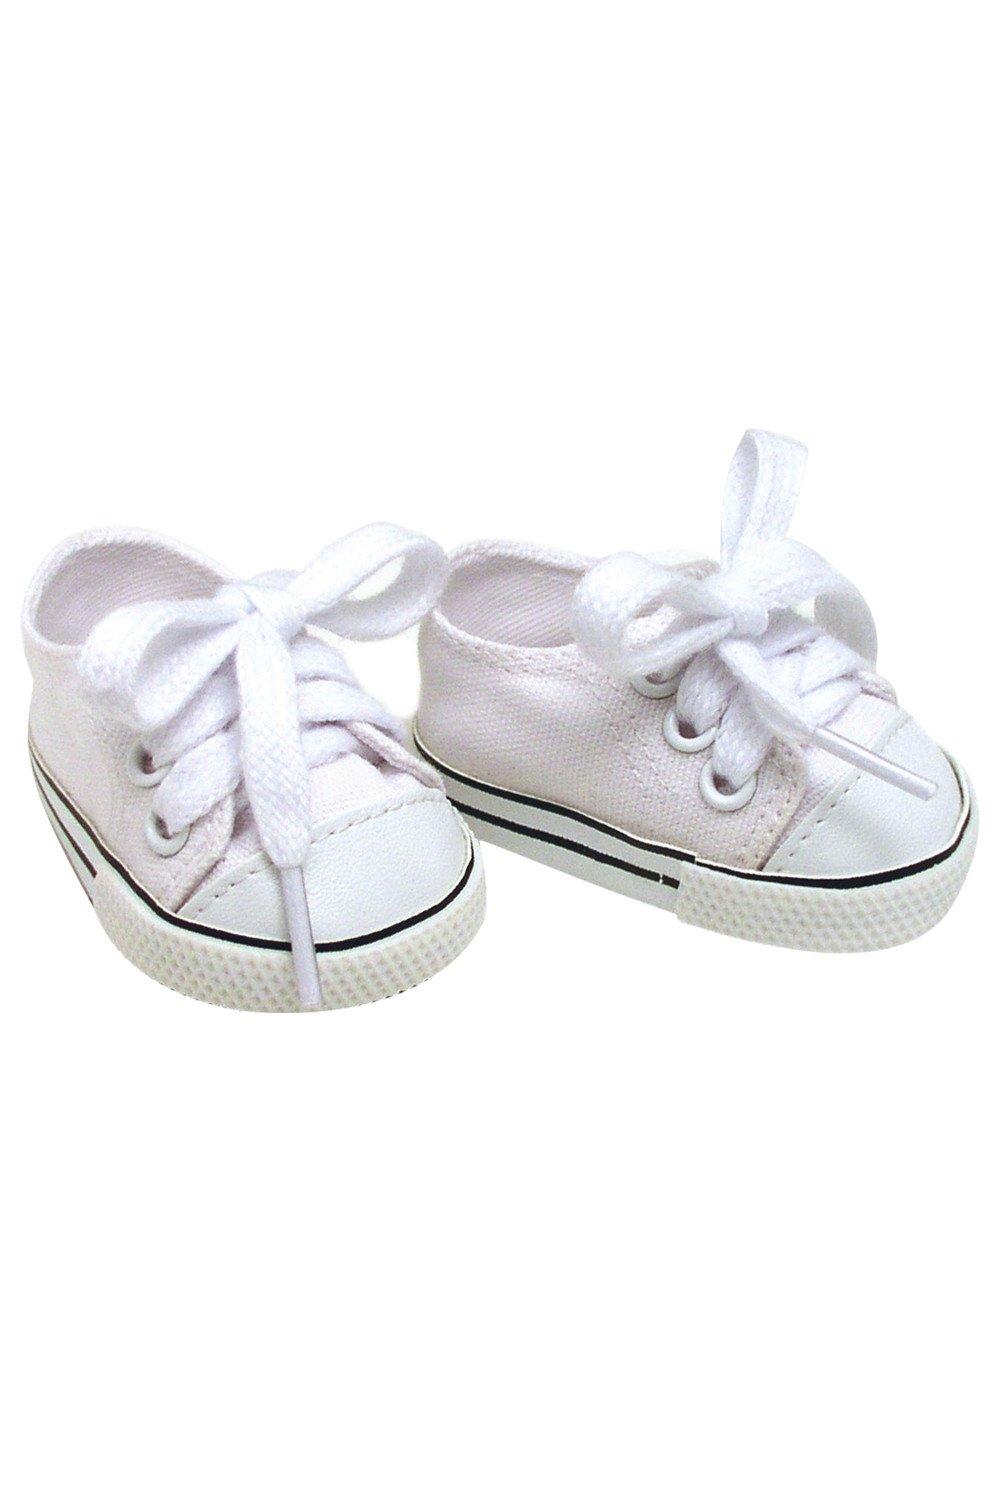 Sophia’s 18" Baby Doll Trainers with Laces, White Dolls Shoes